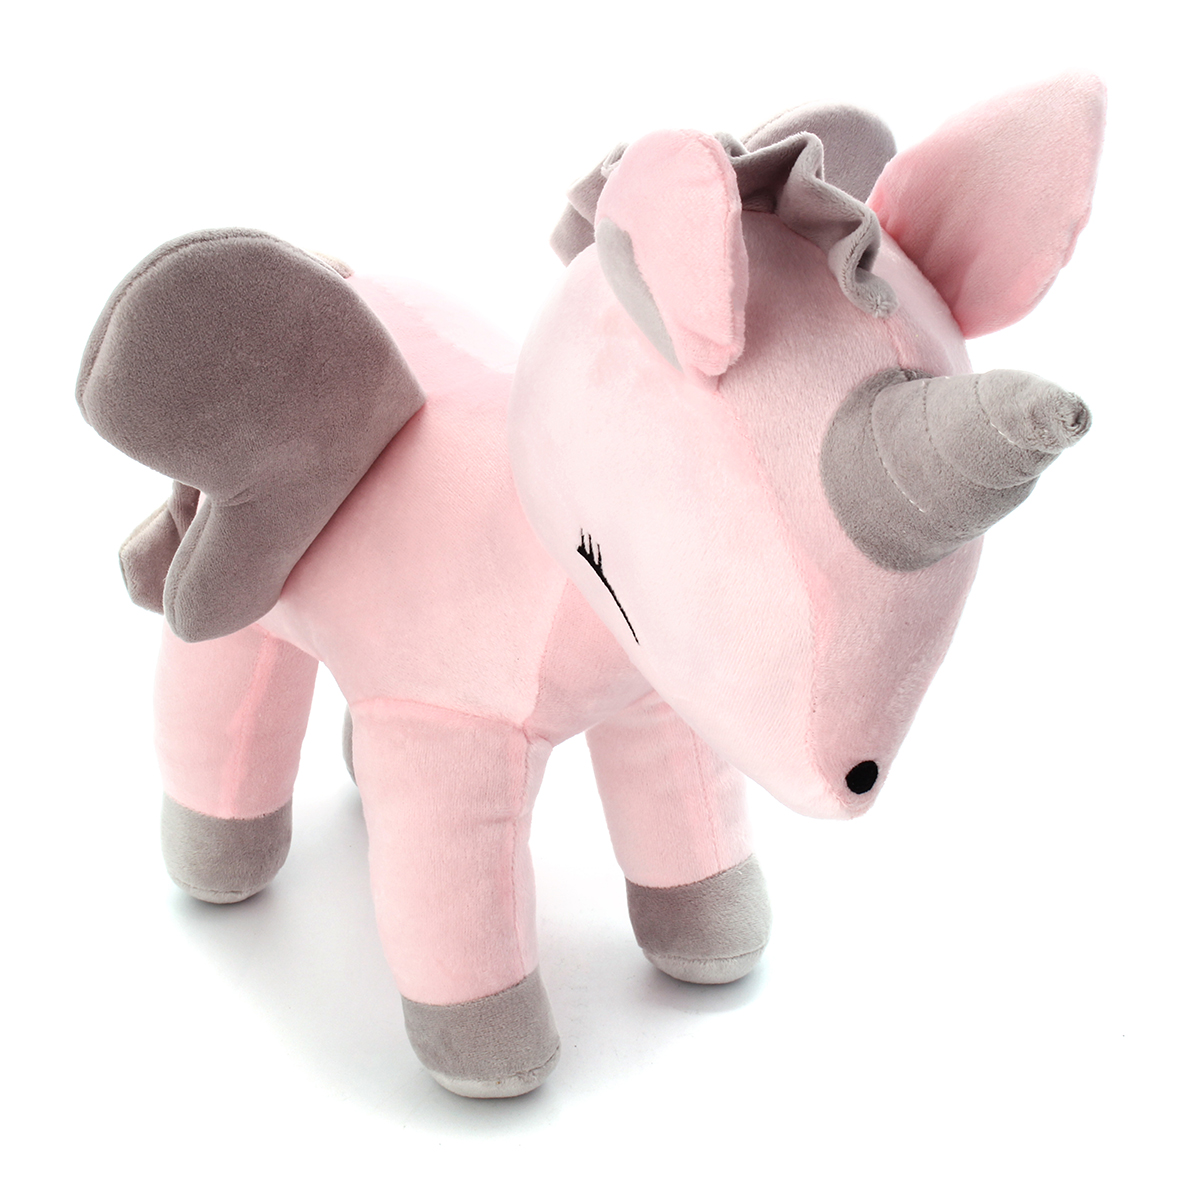 16-Inches-Soft-Giant-Unicorn-Stuffed-Plush-Toy-Animal-Doll-Children-Gifts-Photo-Props-Gift-1299365-5